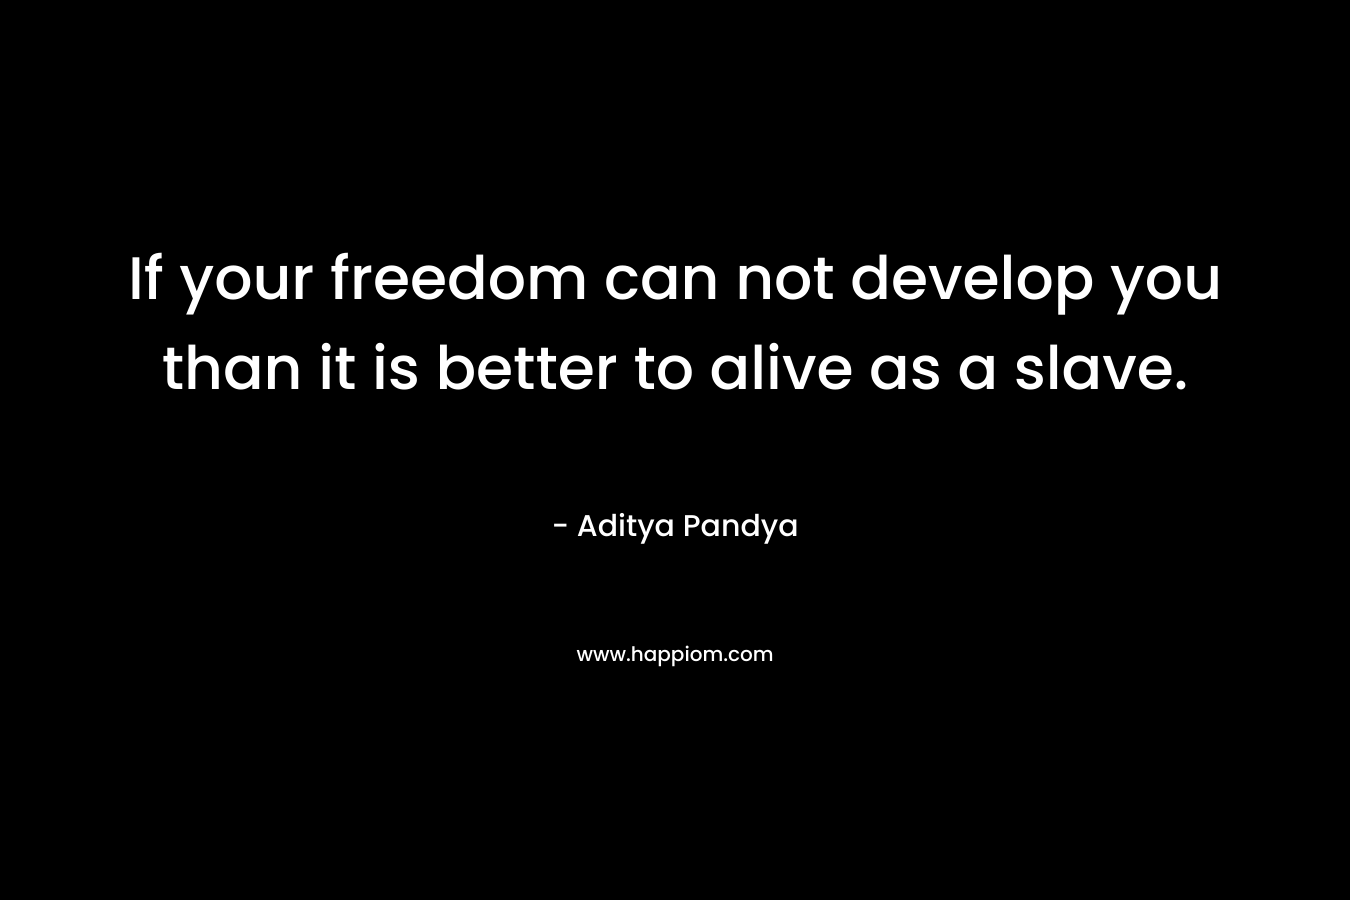 If your freedom can not develop you than it is better to alive as a slave.